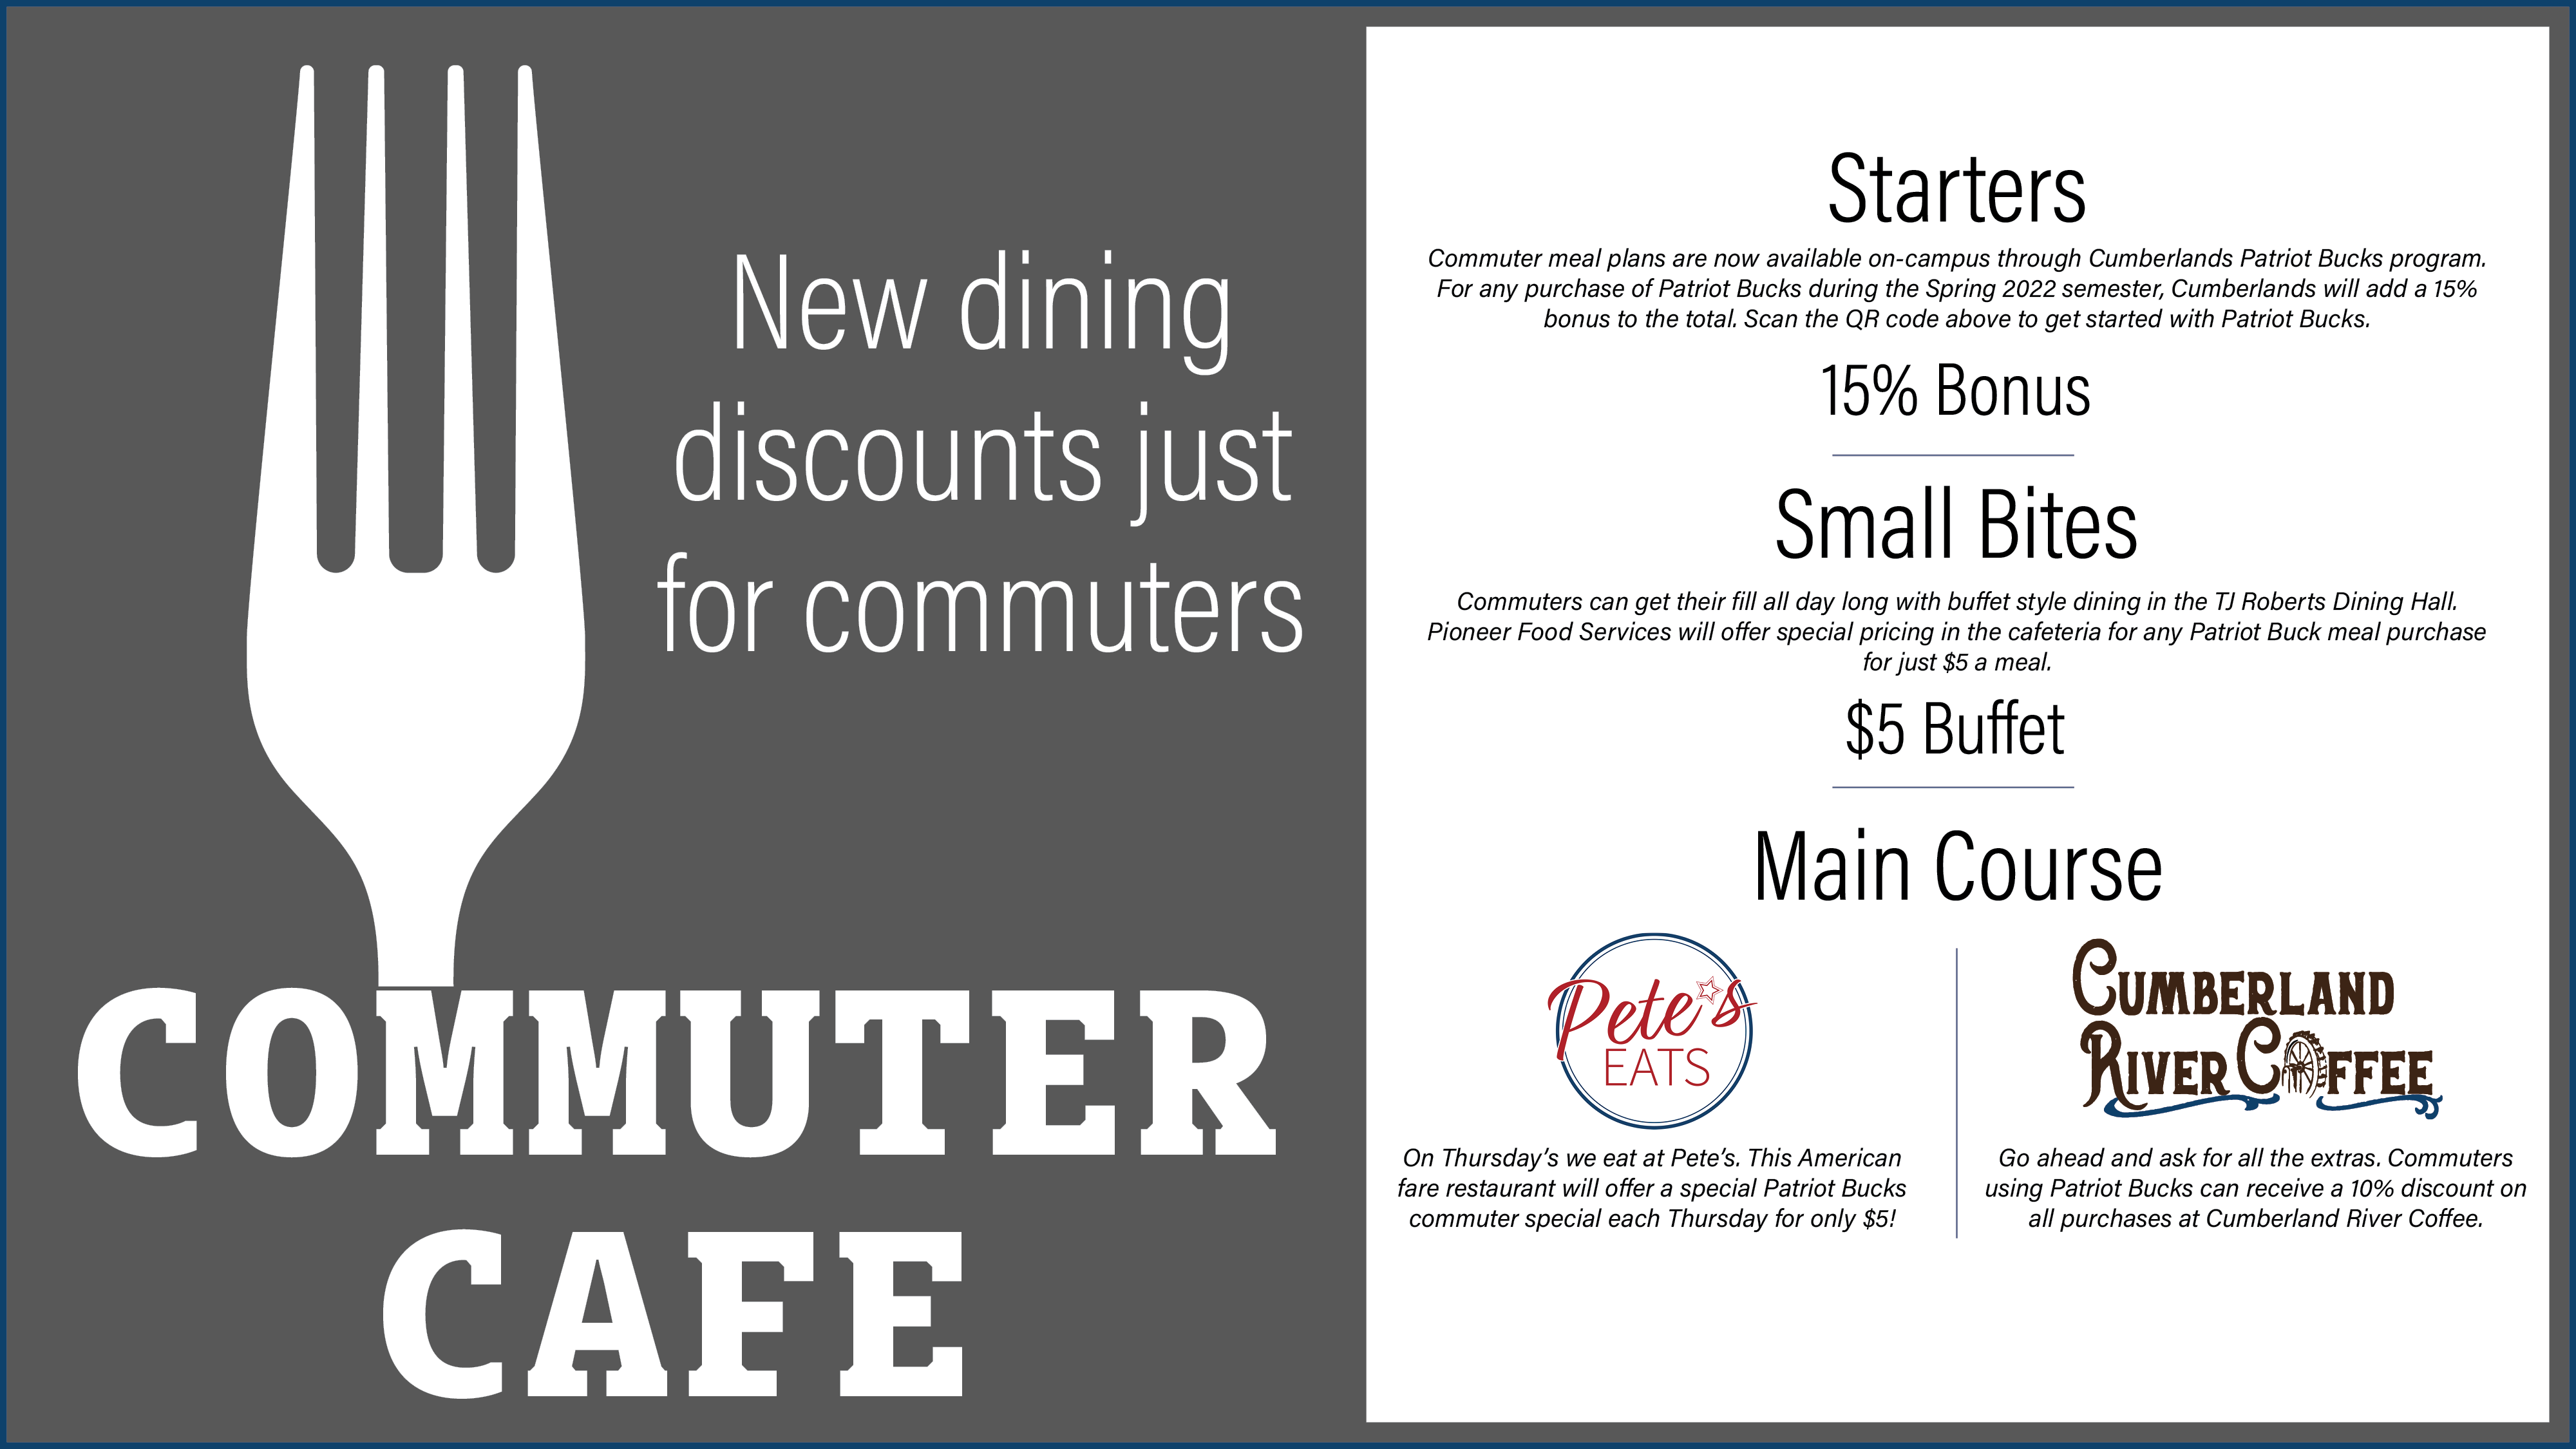 Cumberlands meal plan for commuters